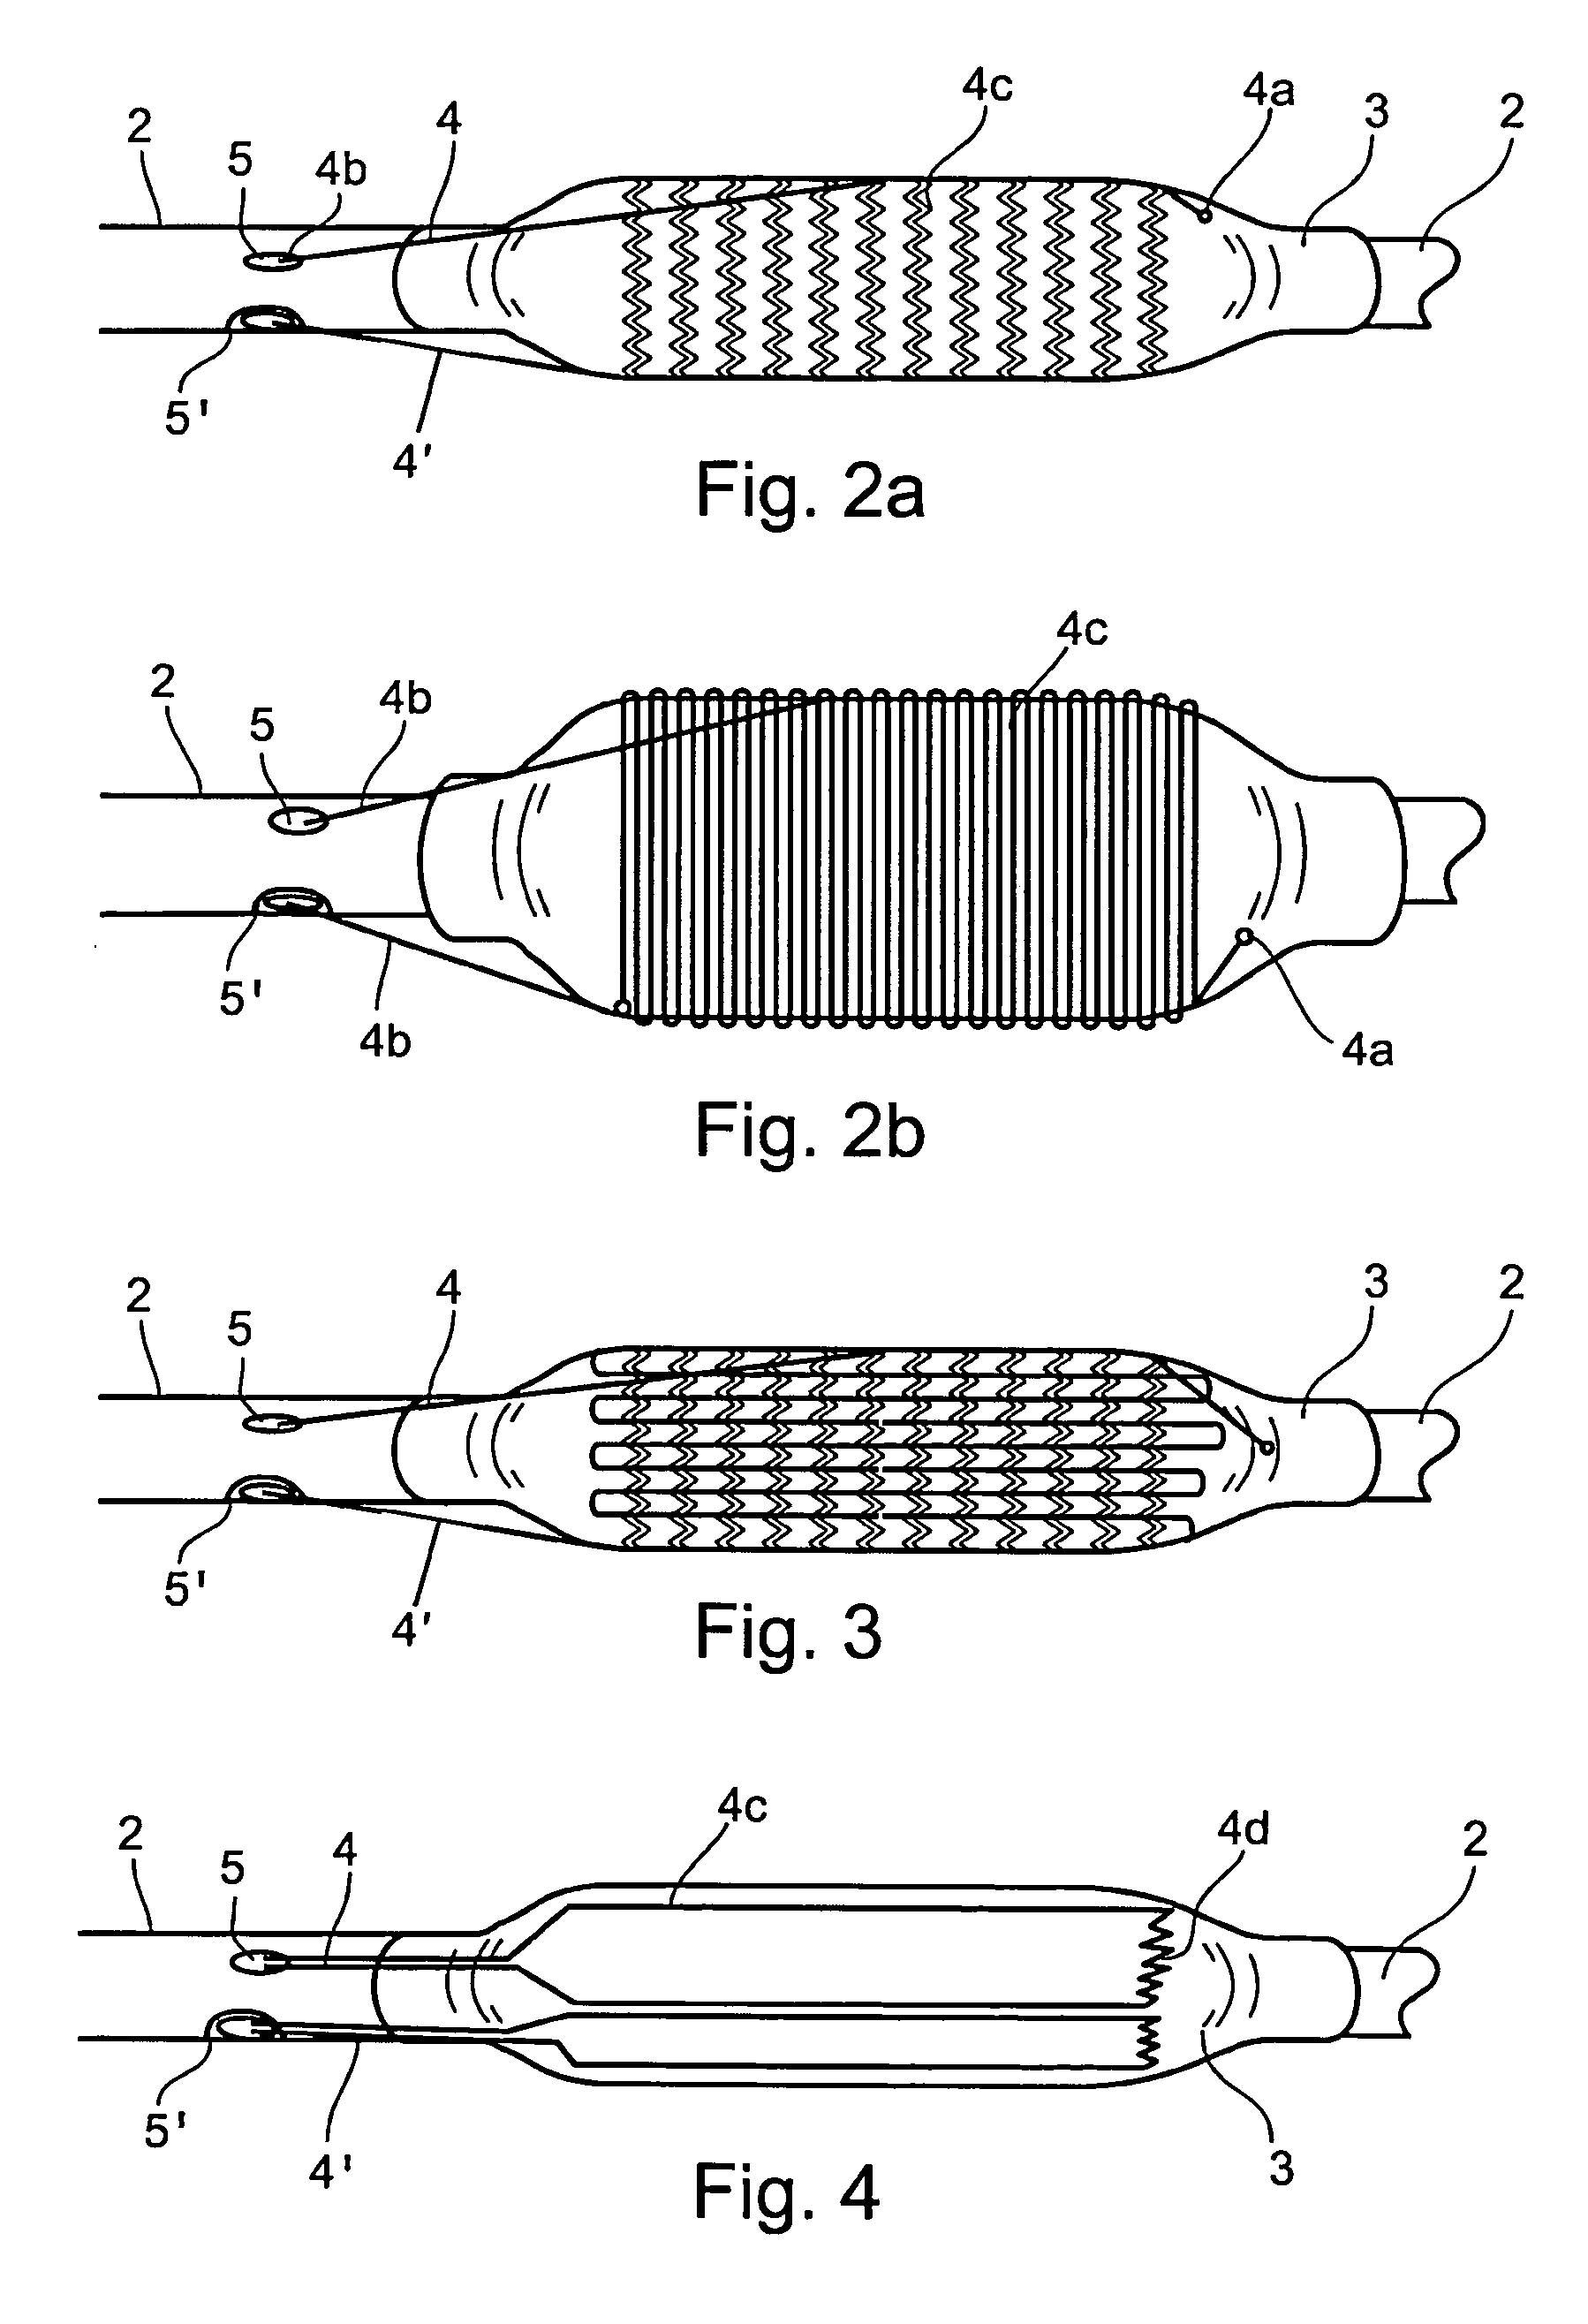 Apparatus and method for removing deposits from tubular structure, particularly atheroma from blood vessels